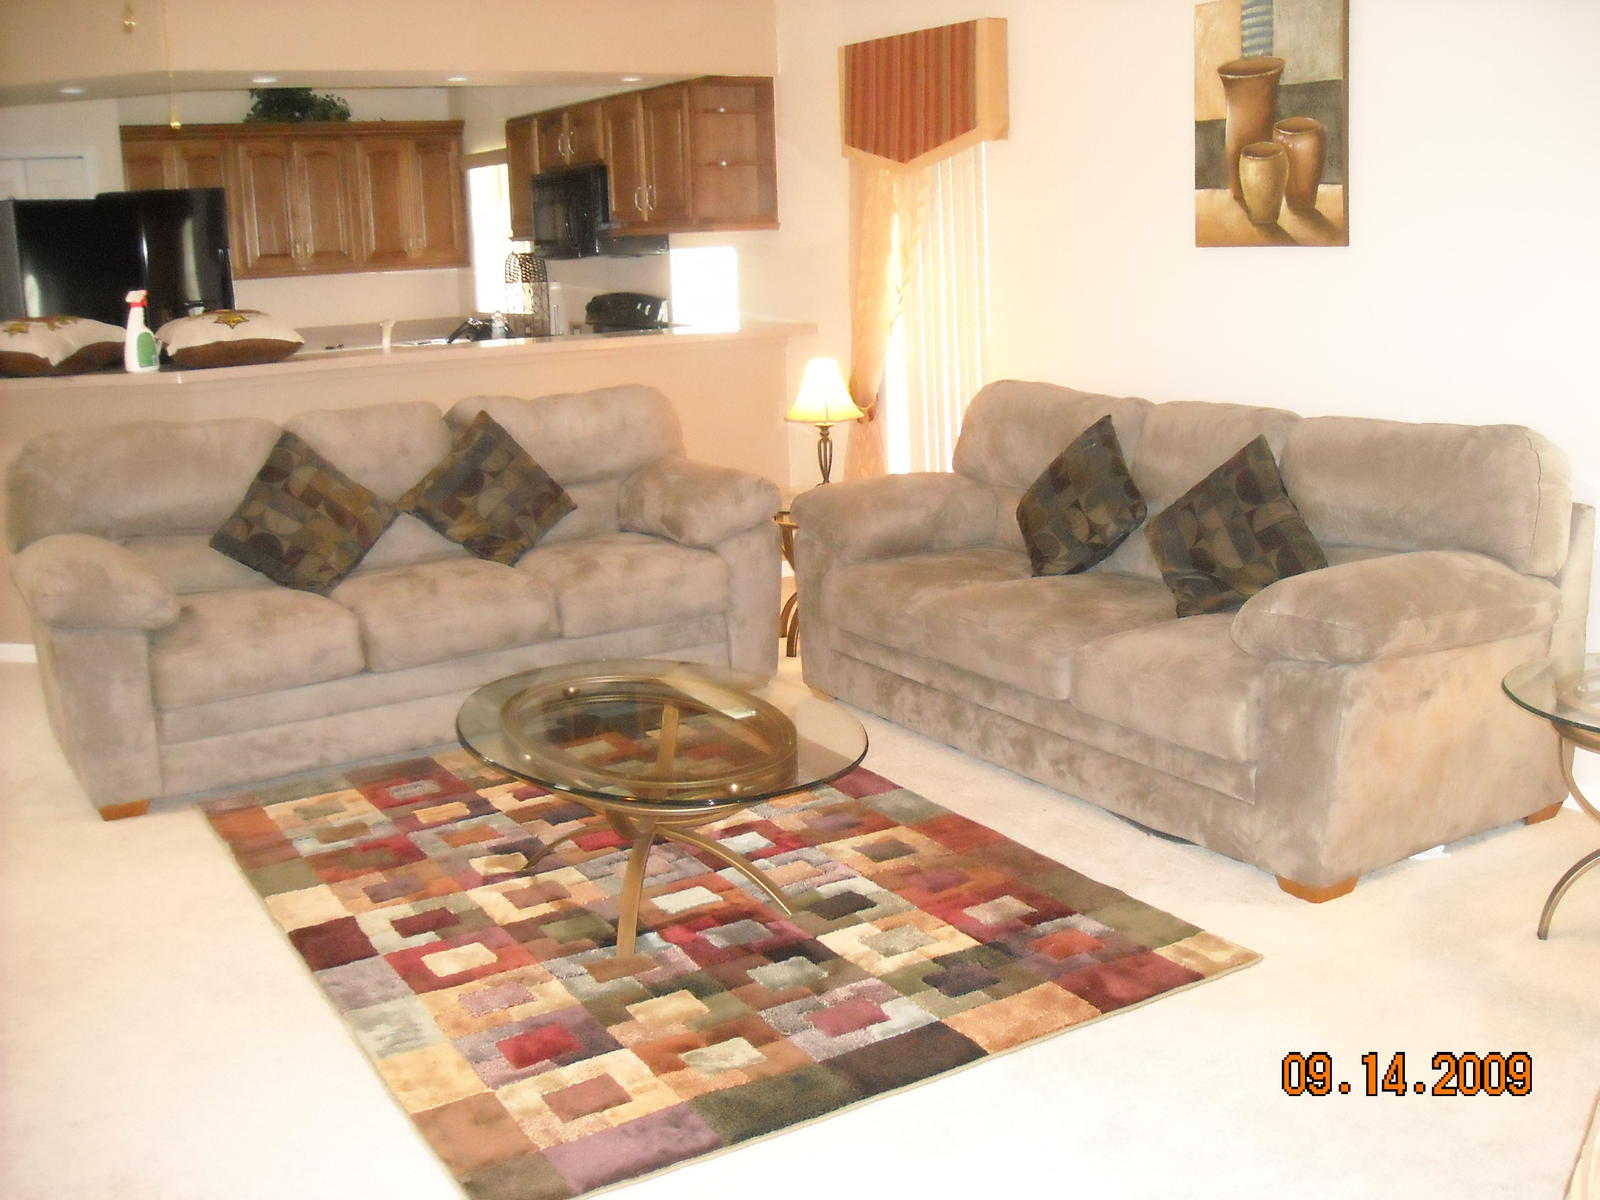 Furniture for sale - Classified Ads -Buy and sell, listings, houses - City-Data Forum